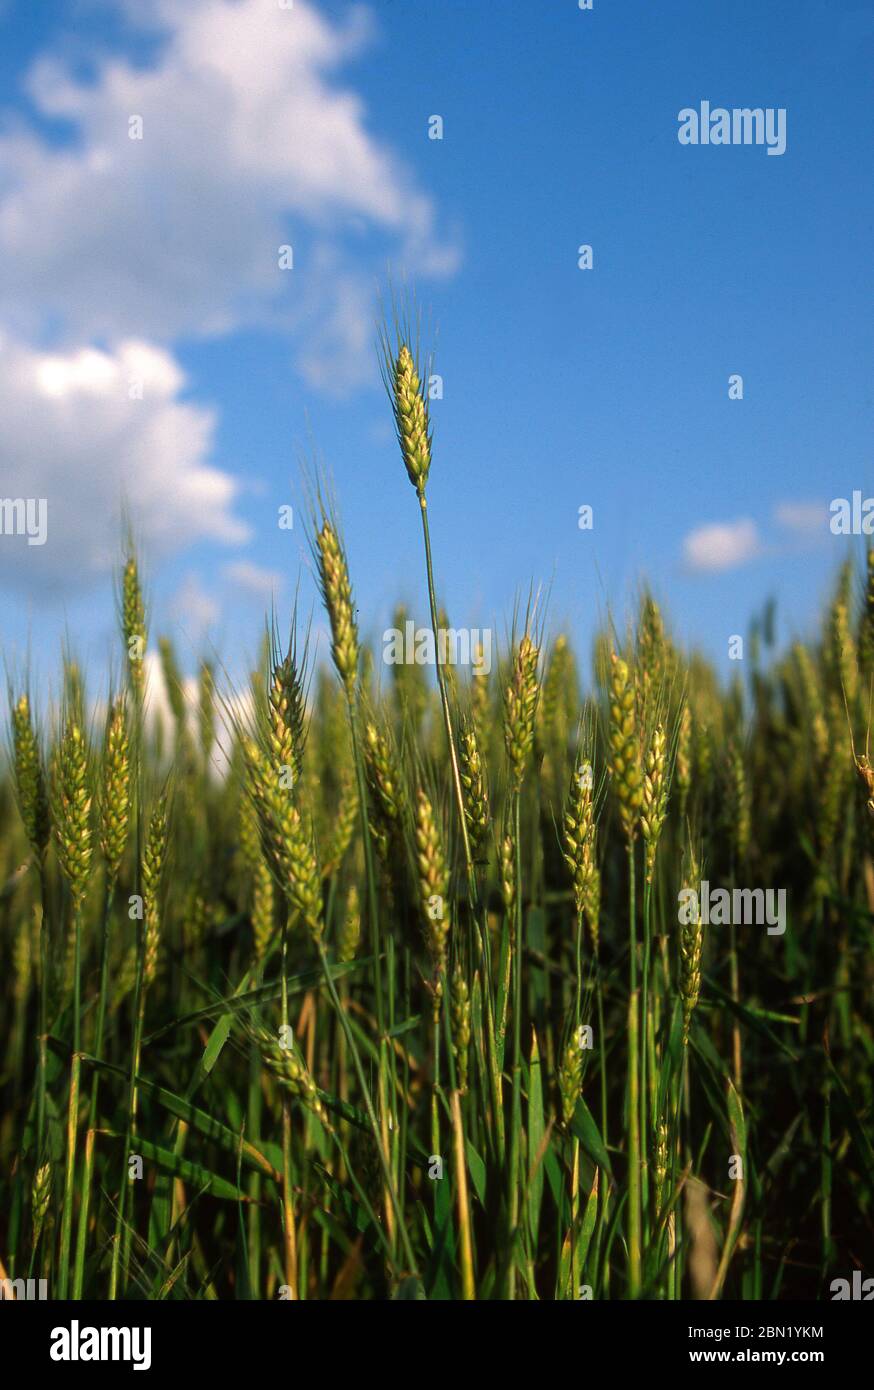 Vertical shot of a wheat field Stock Photo